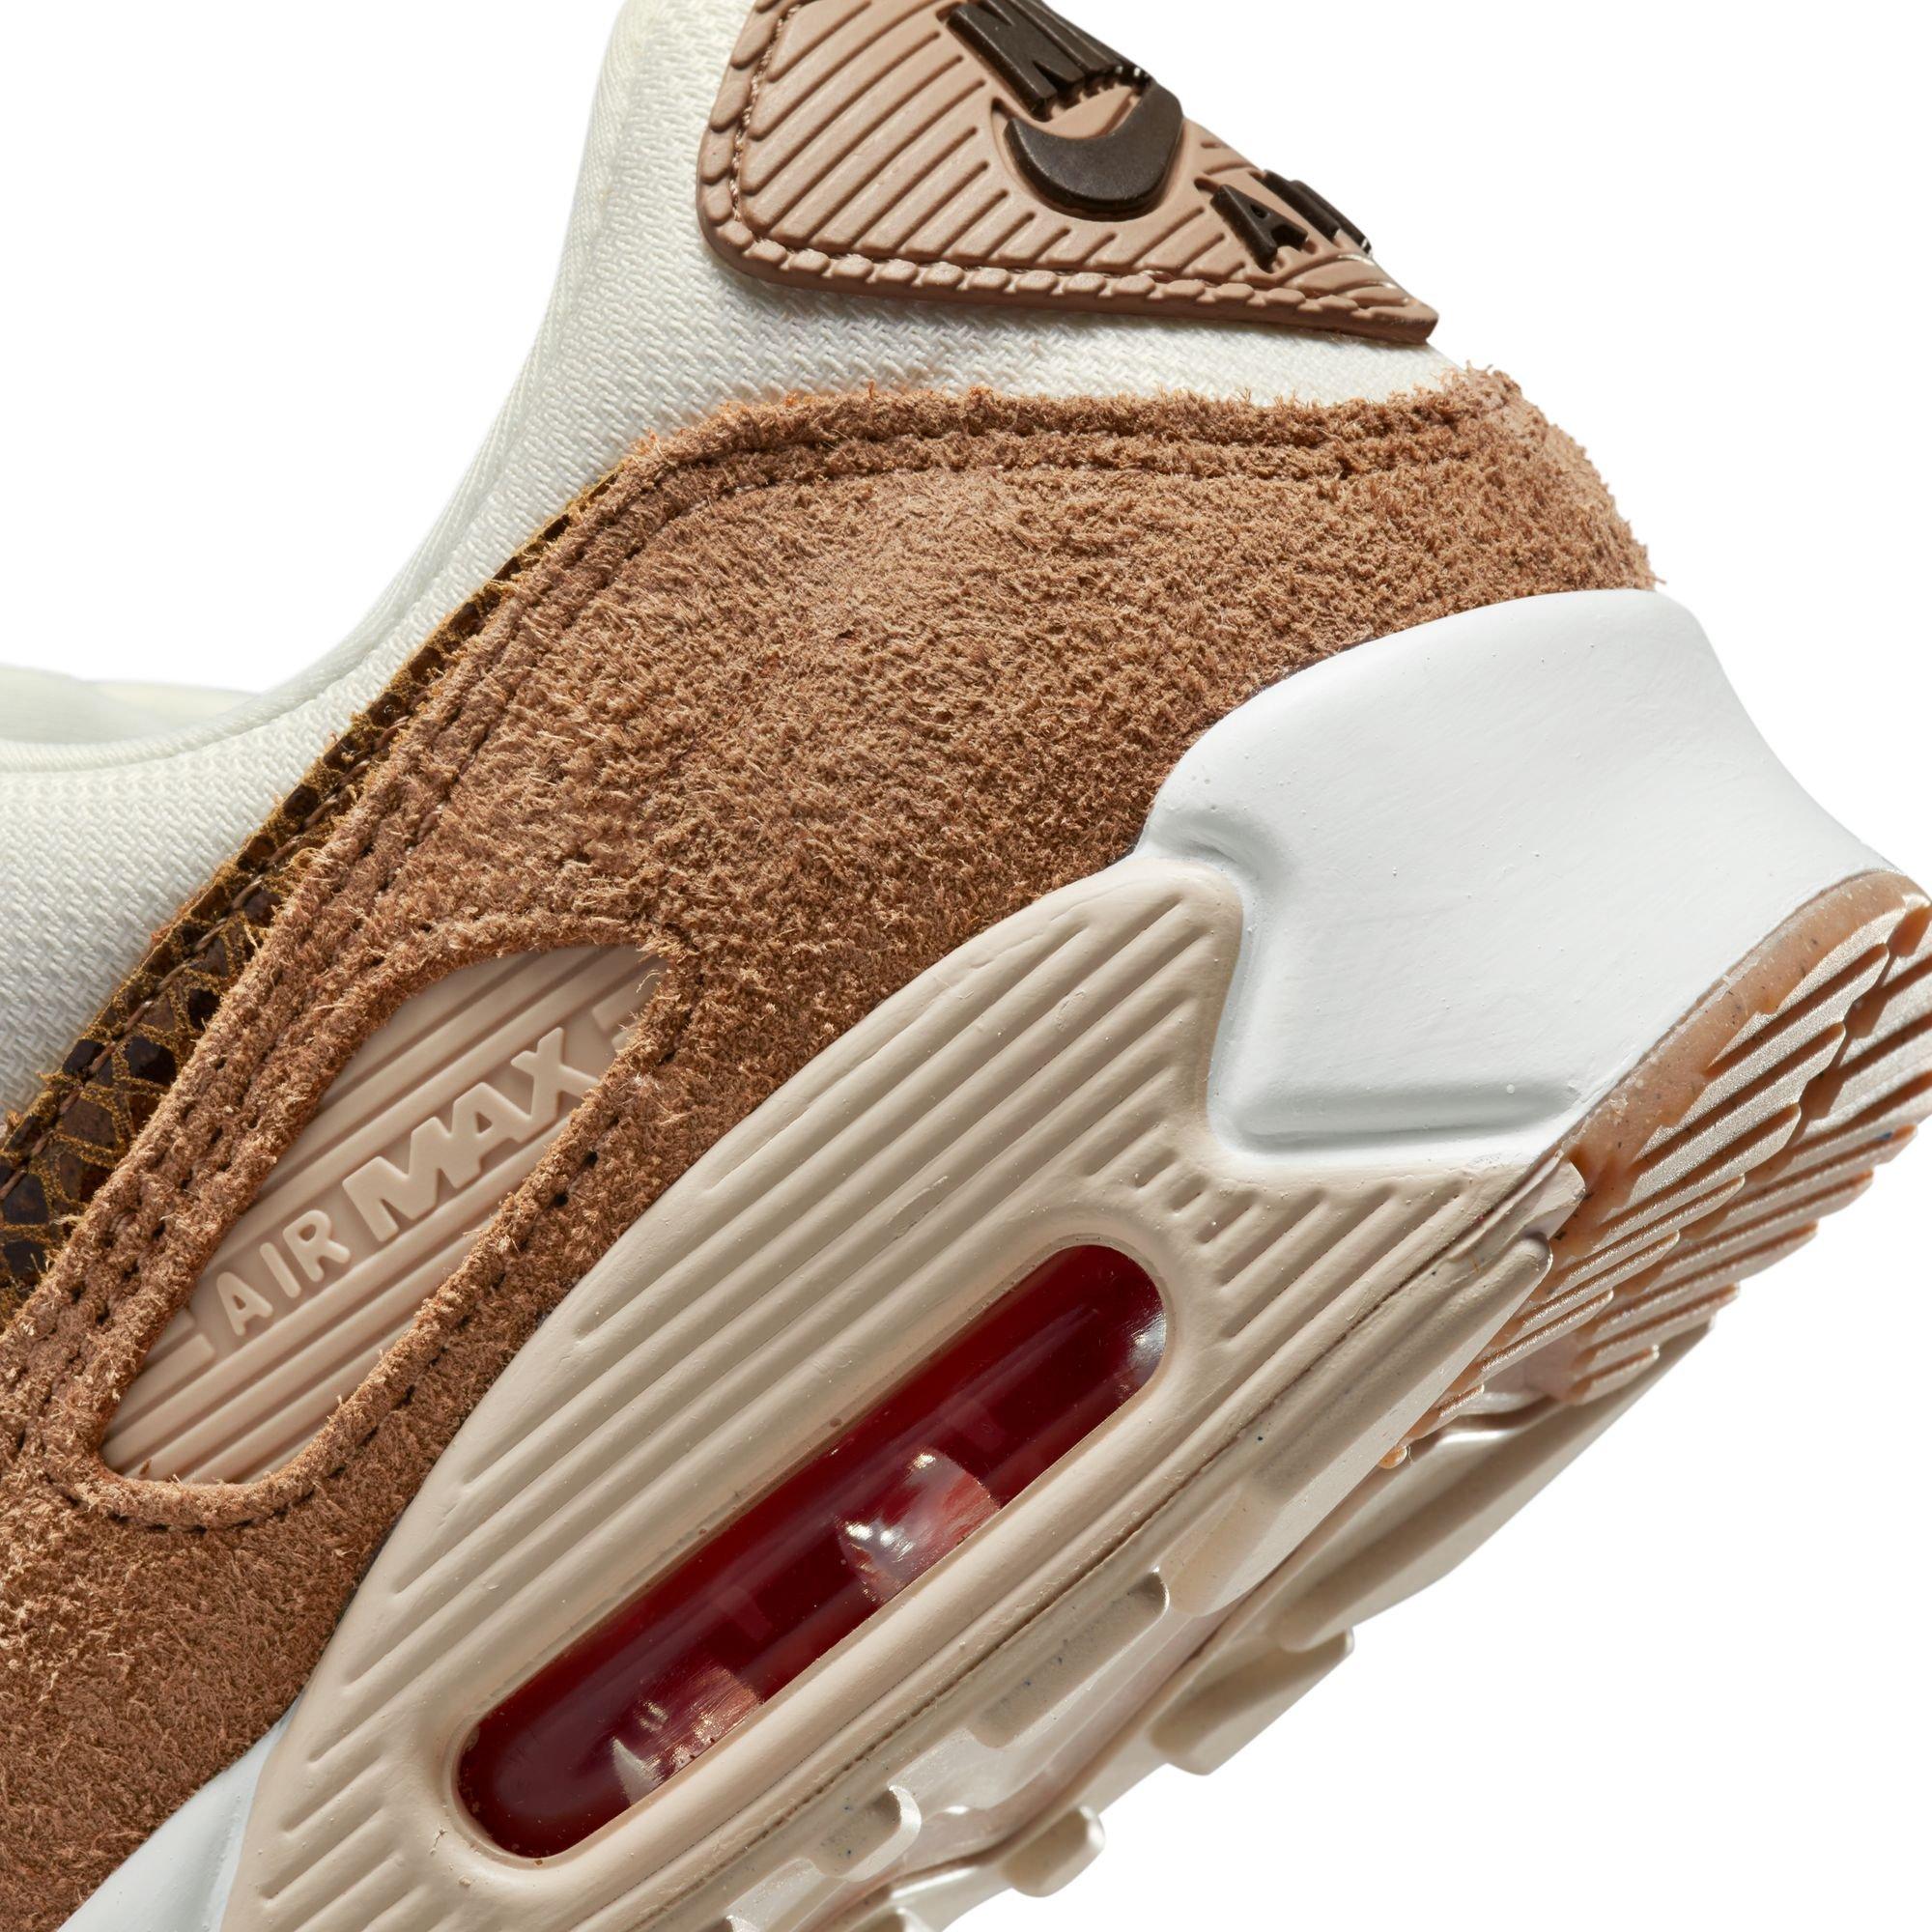 Nike Air Max 90 SE "Pale Ivory/Picante Red/Summit White"​ Women's Shoe